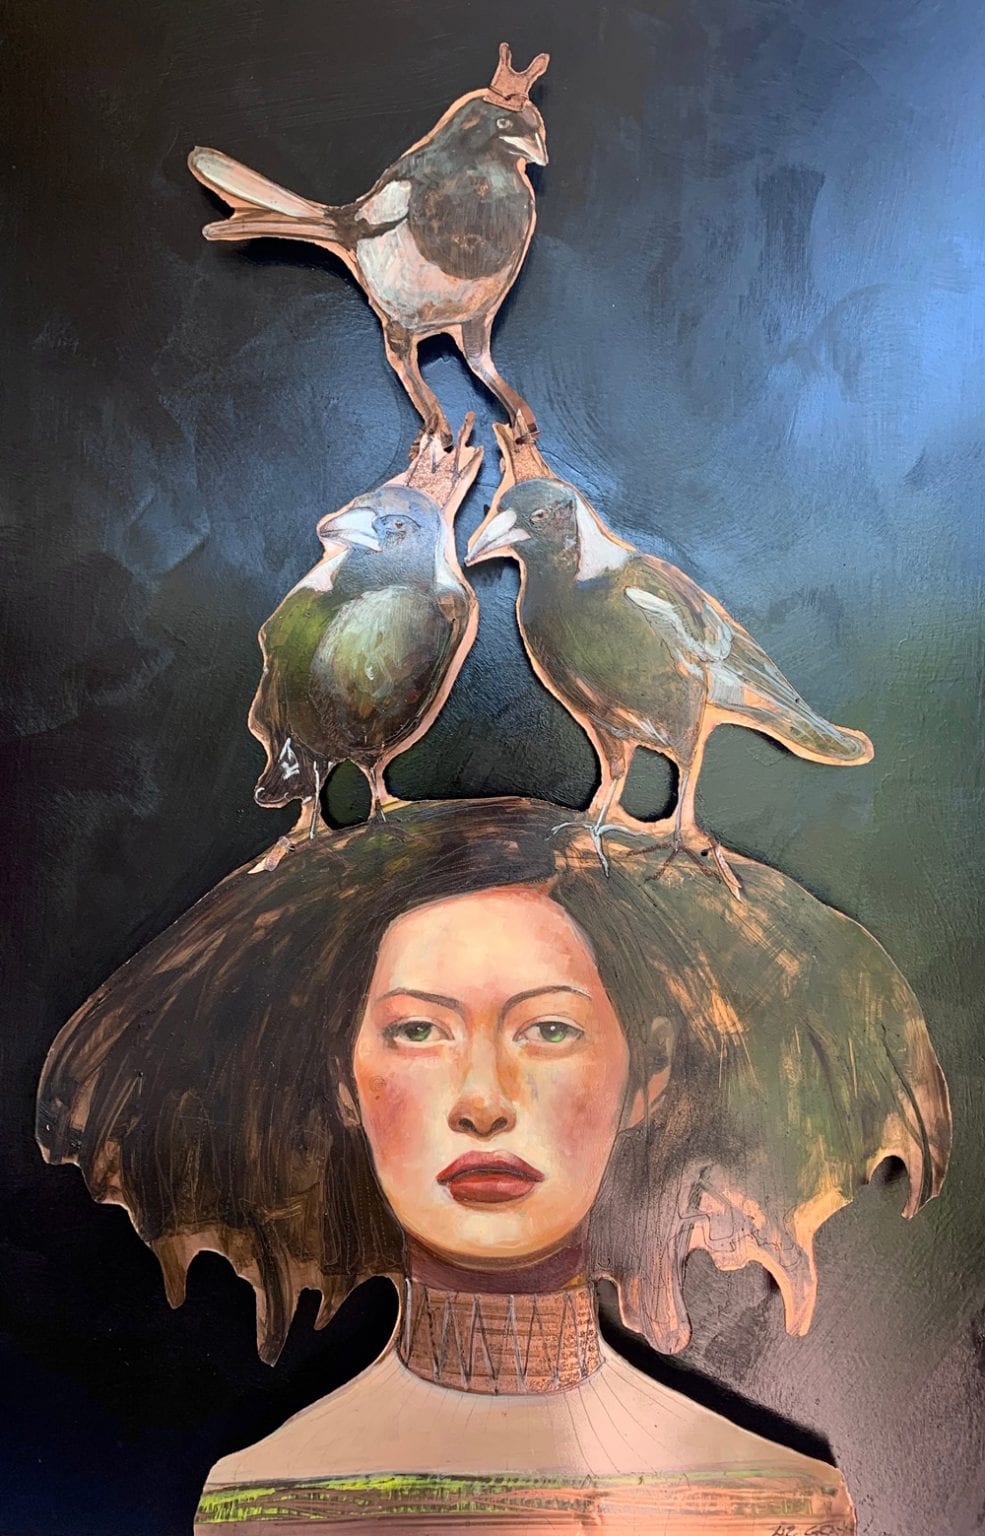 Copper Art- Liz Gray's Magpie Maiden oil on copper work showing a woman with magpie birds on her head